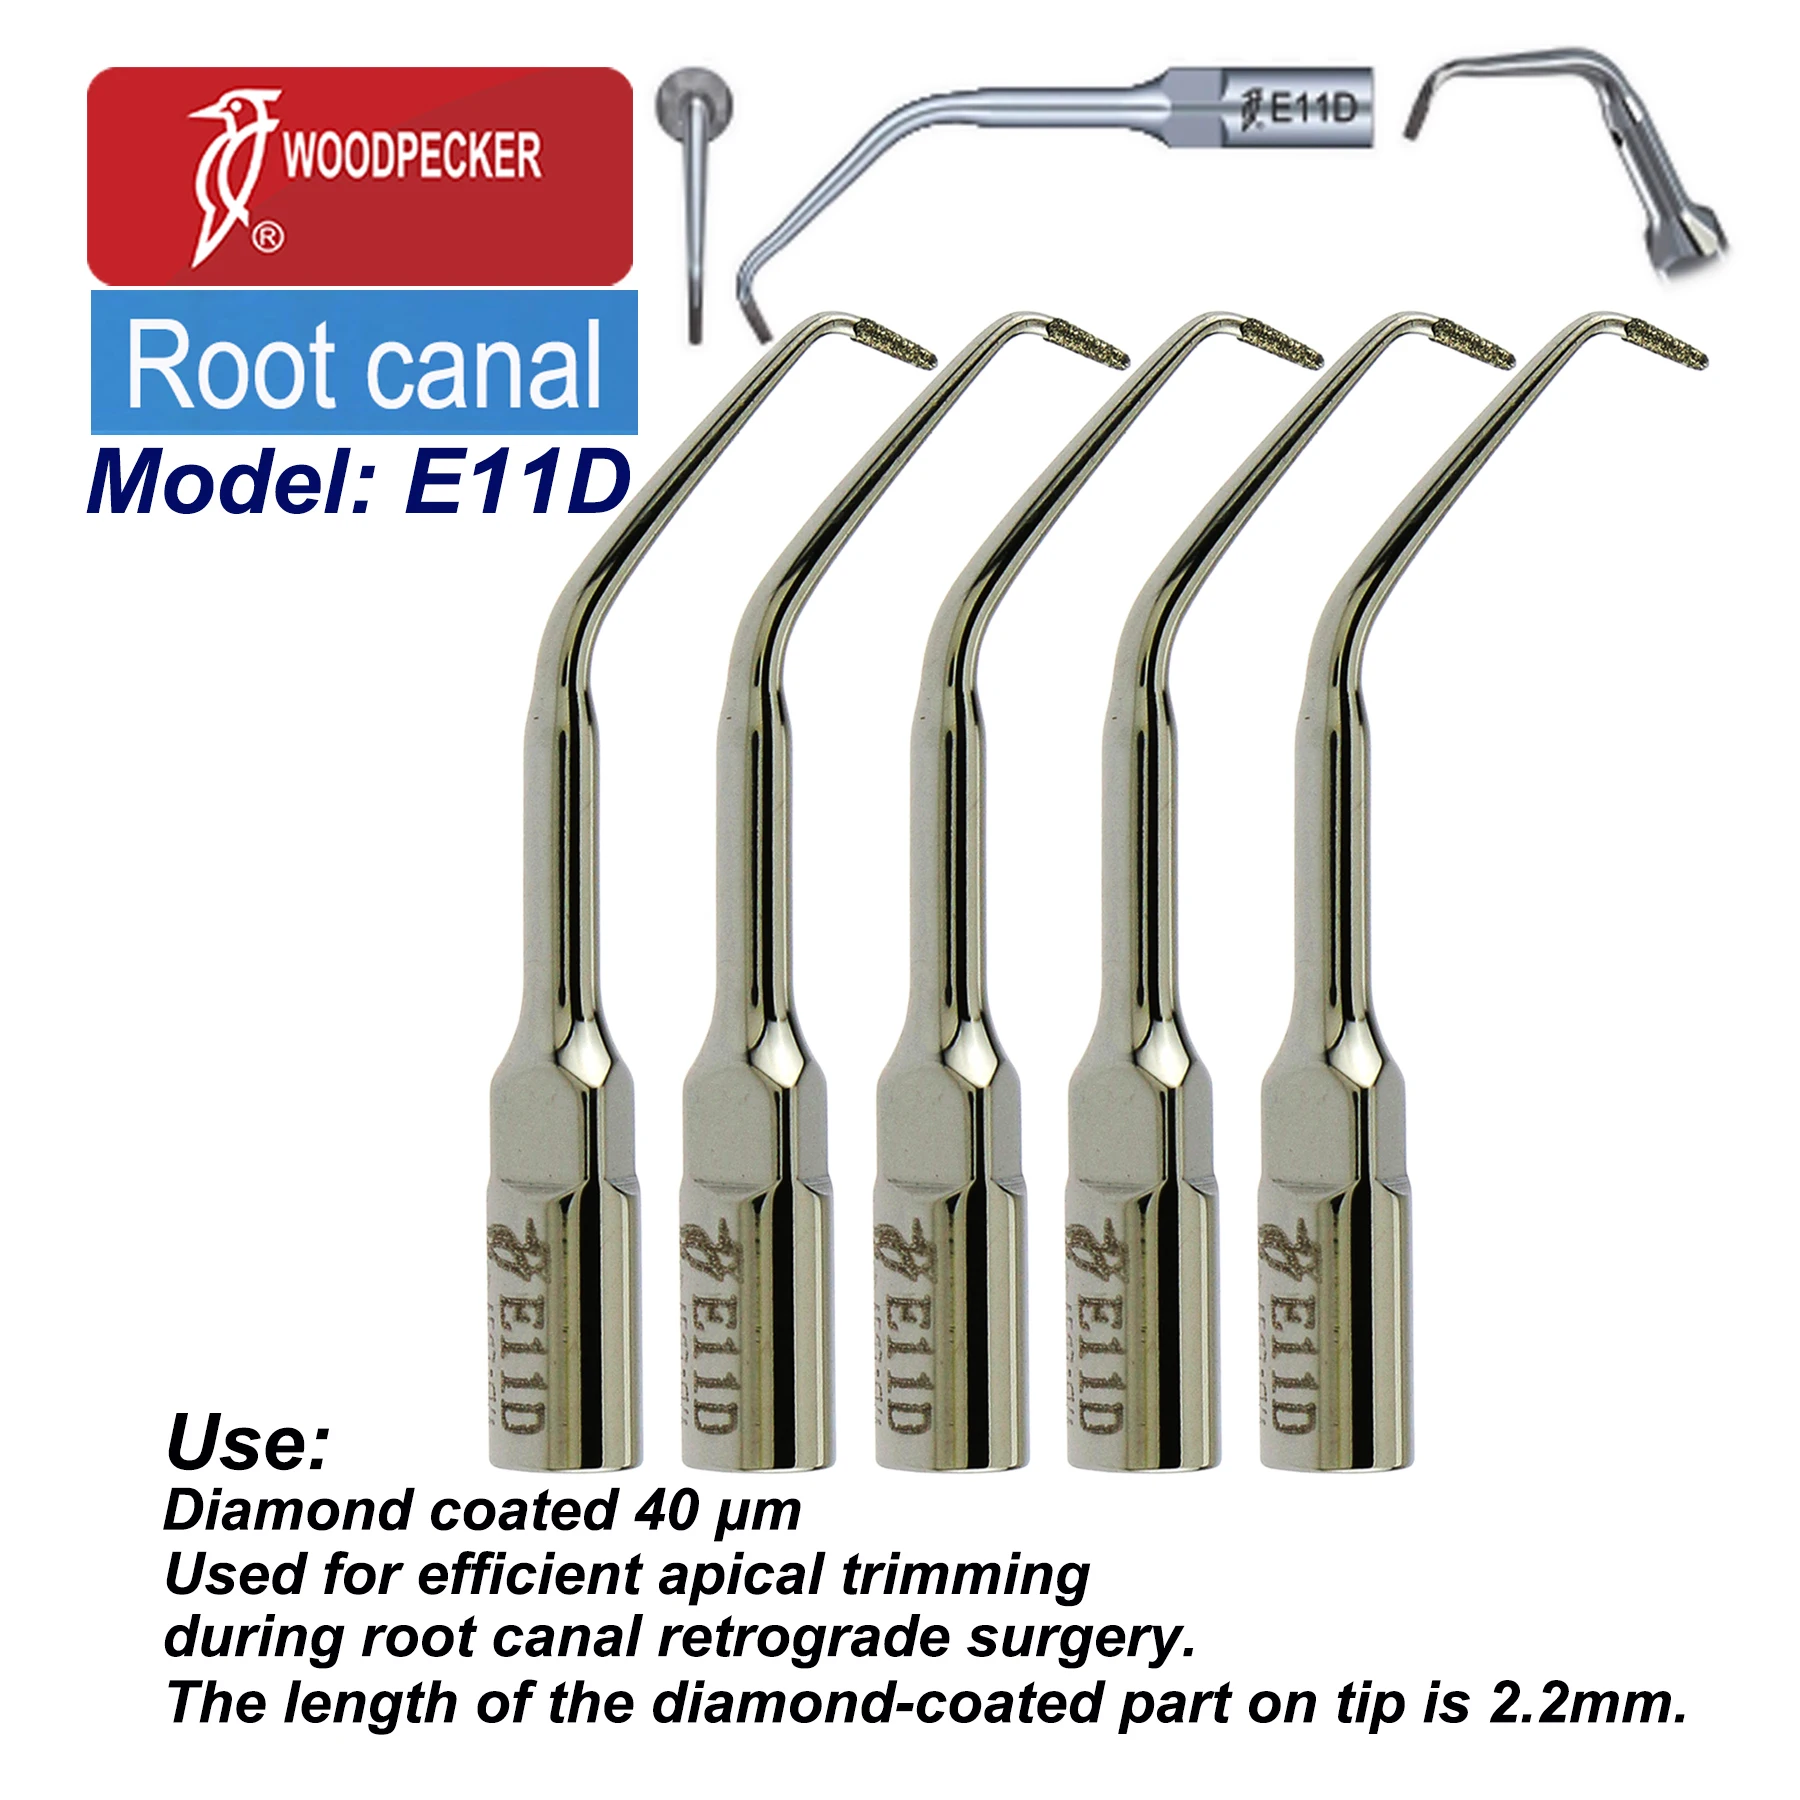 5pcs Woodpecker Dental Ultrasonic Scaler Tips Diamond Coated Root Canal Surgery Efficient Apical Trimming Fit UDS EMS E11D